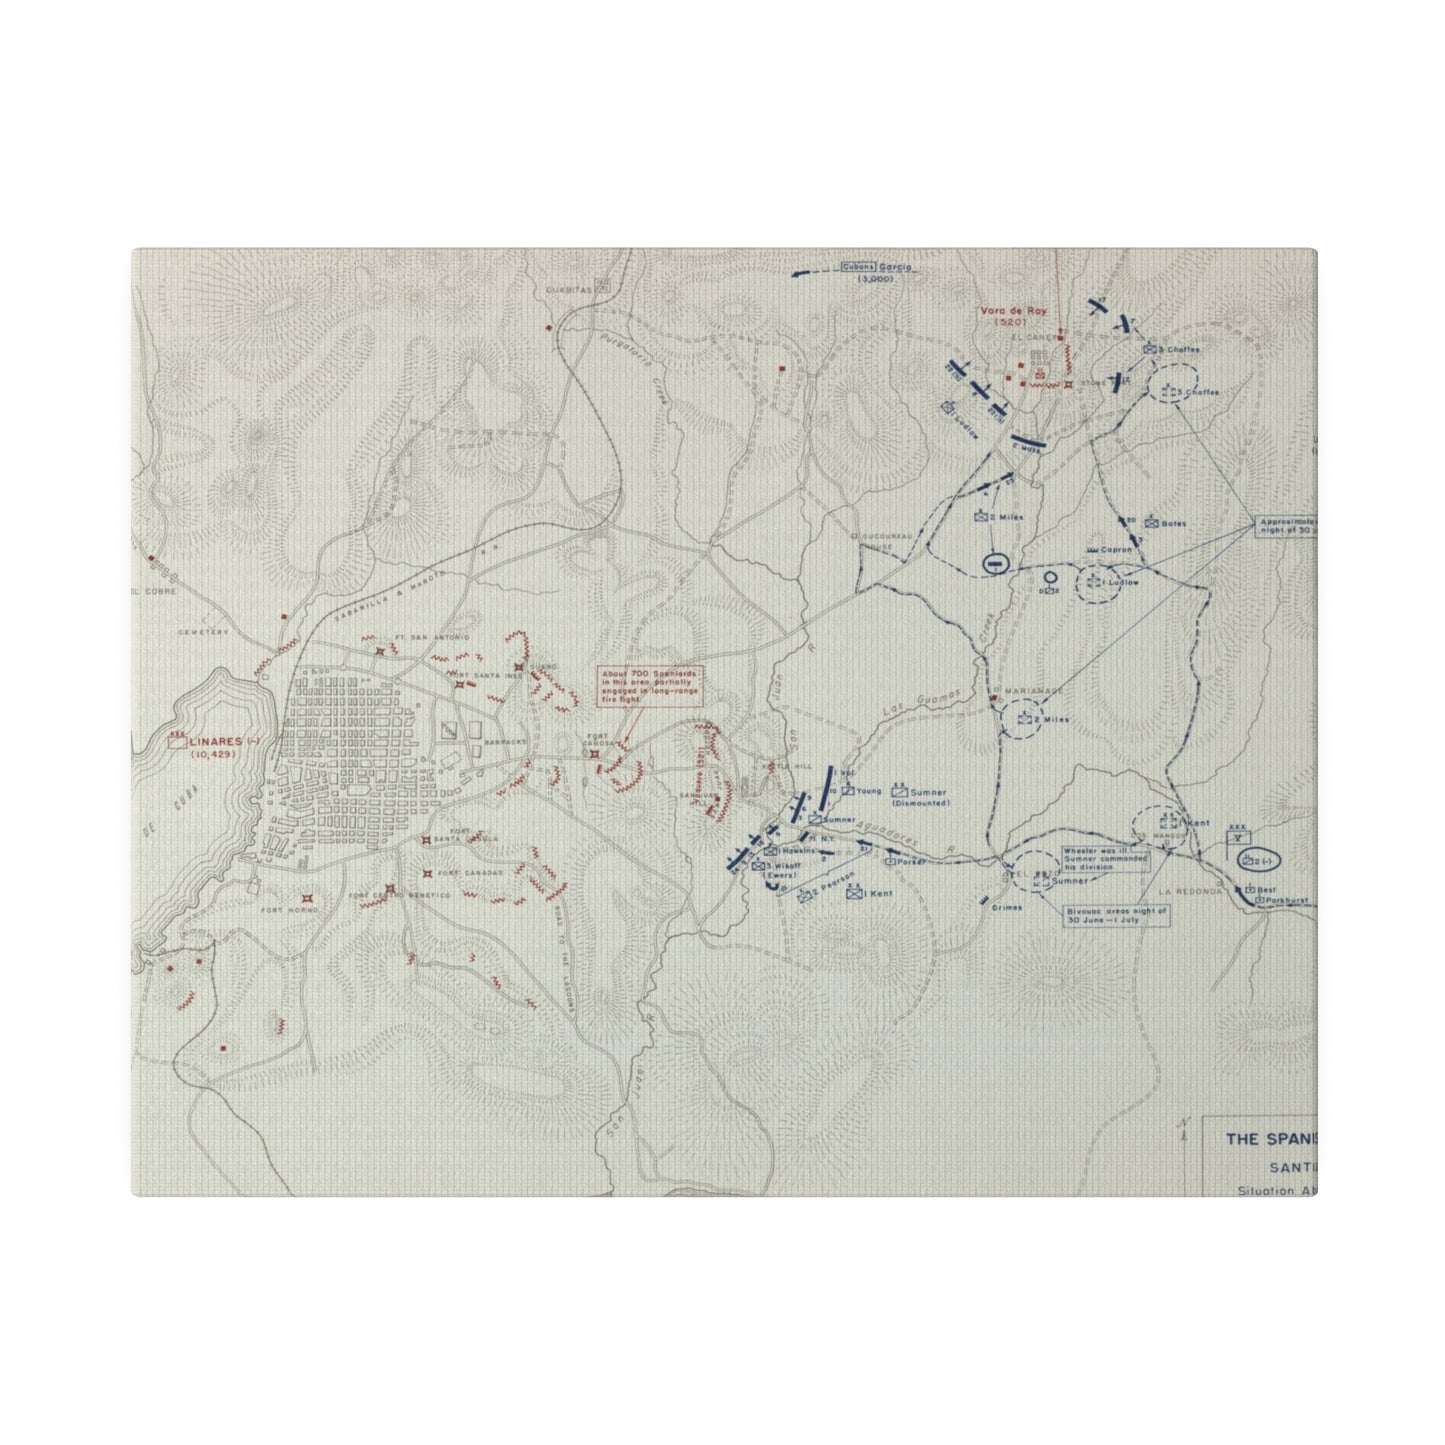 Spanish-American War, Santiago Campaign, Situation Noon 1 July 1898